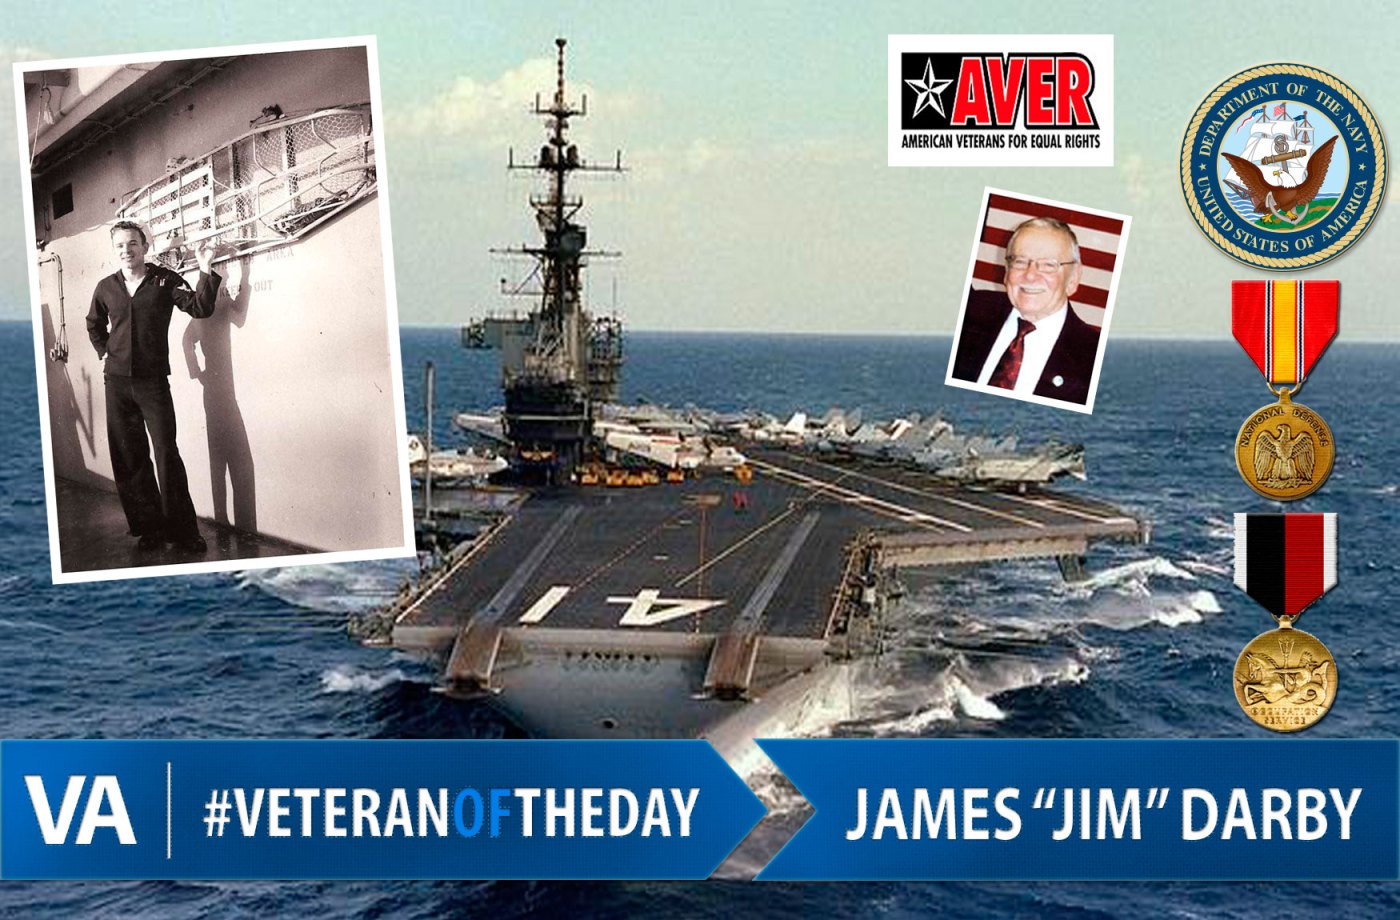 Veteran of the day James Darby